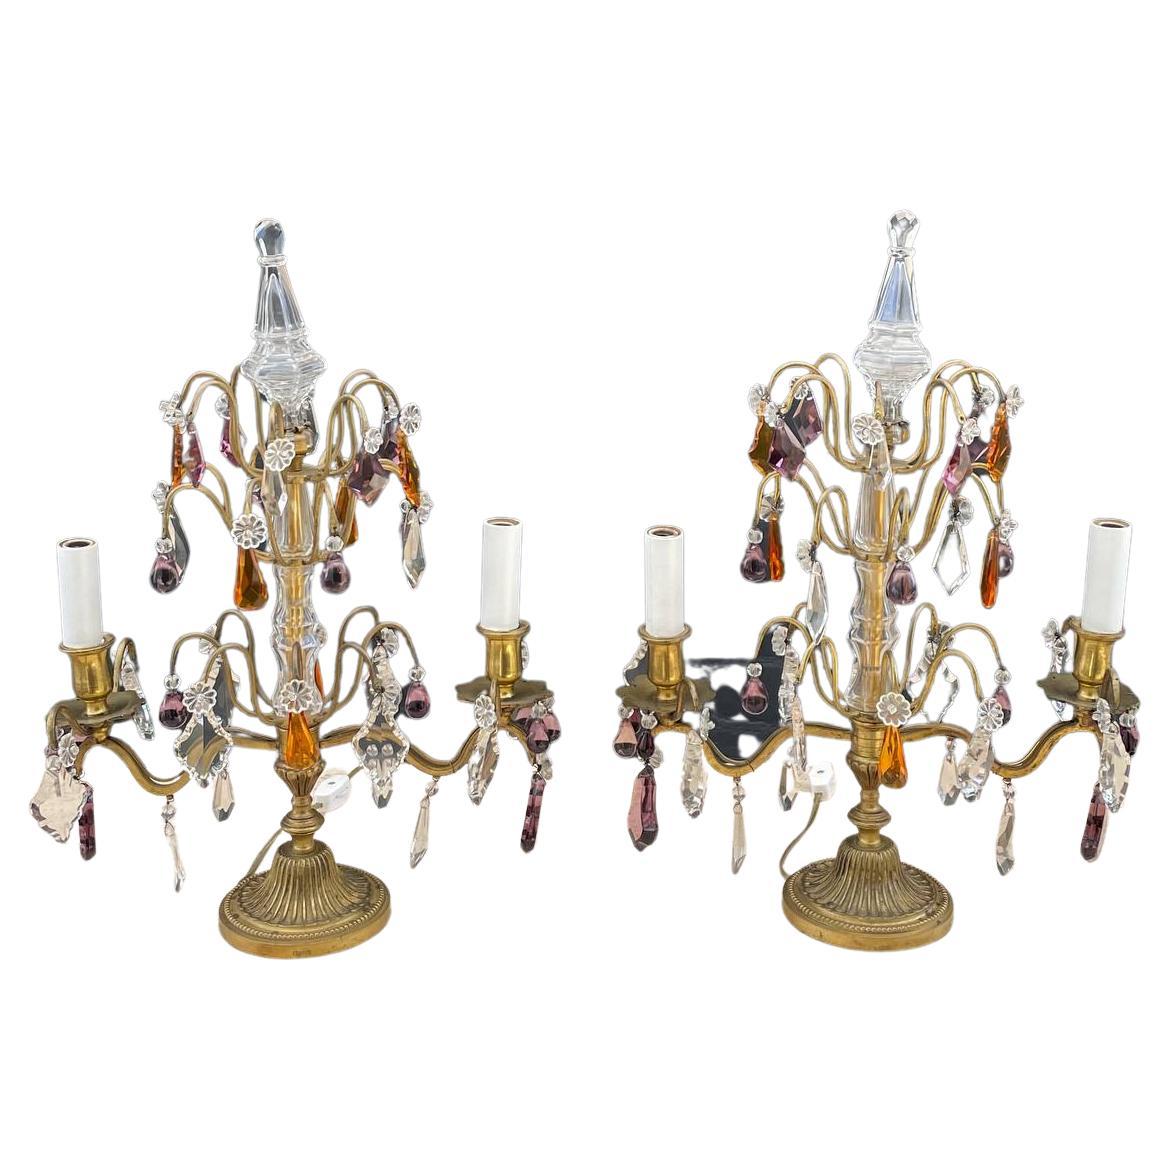 Pair of Antique French Crystal Girandoles Lamps